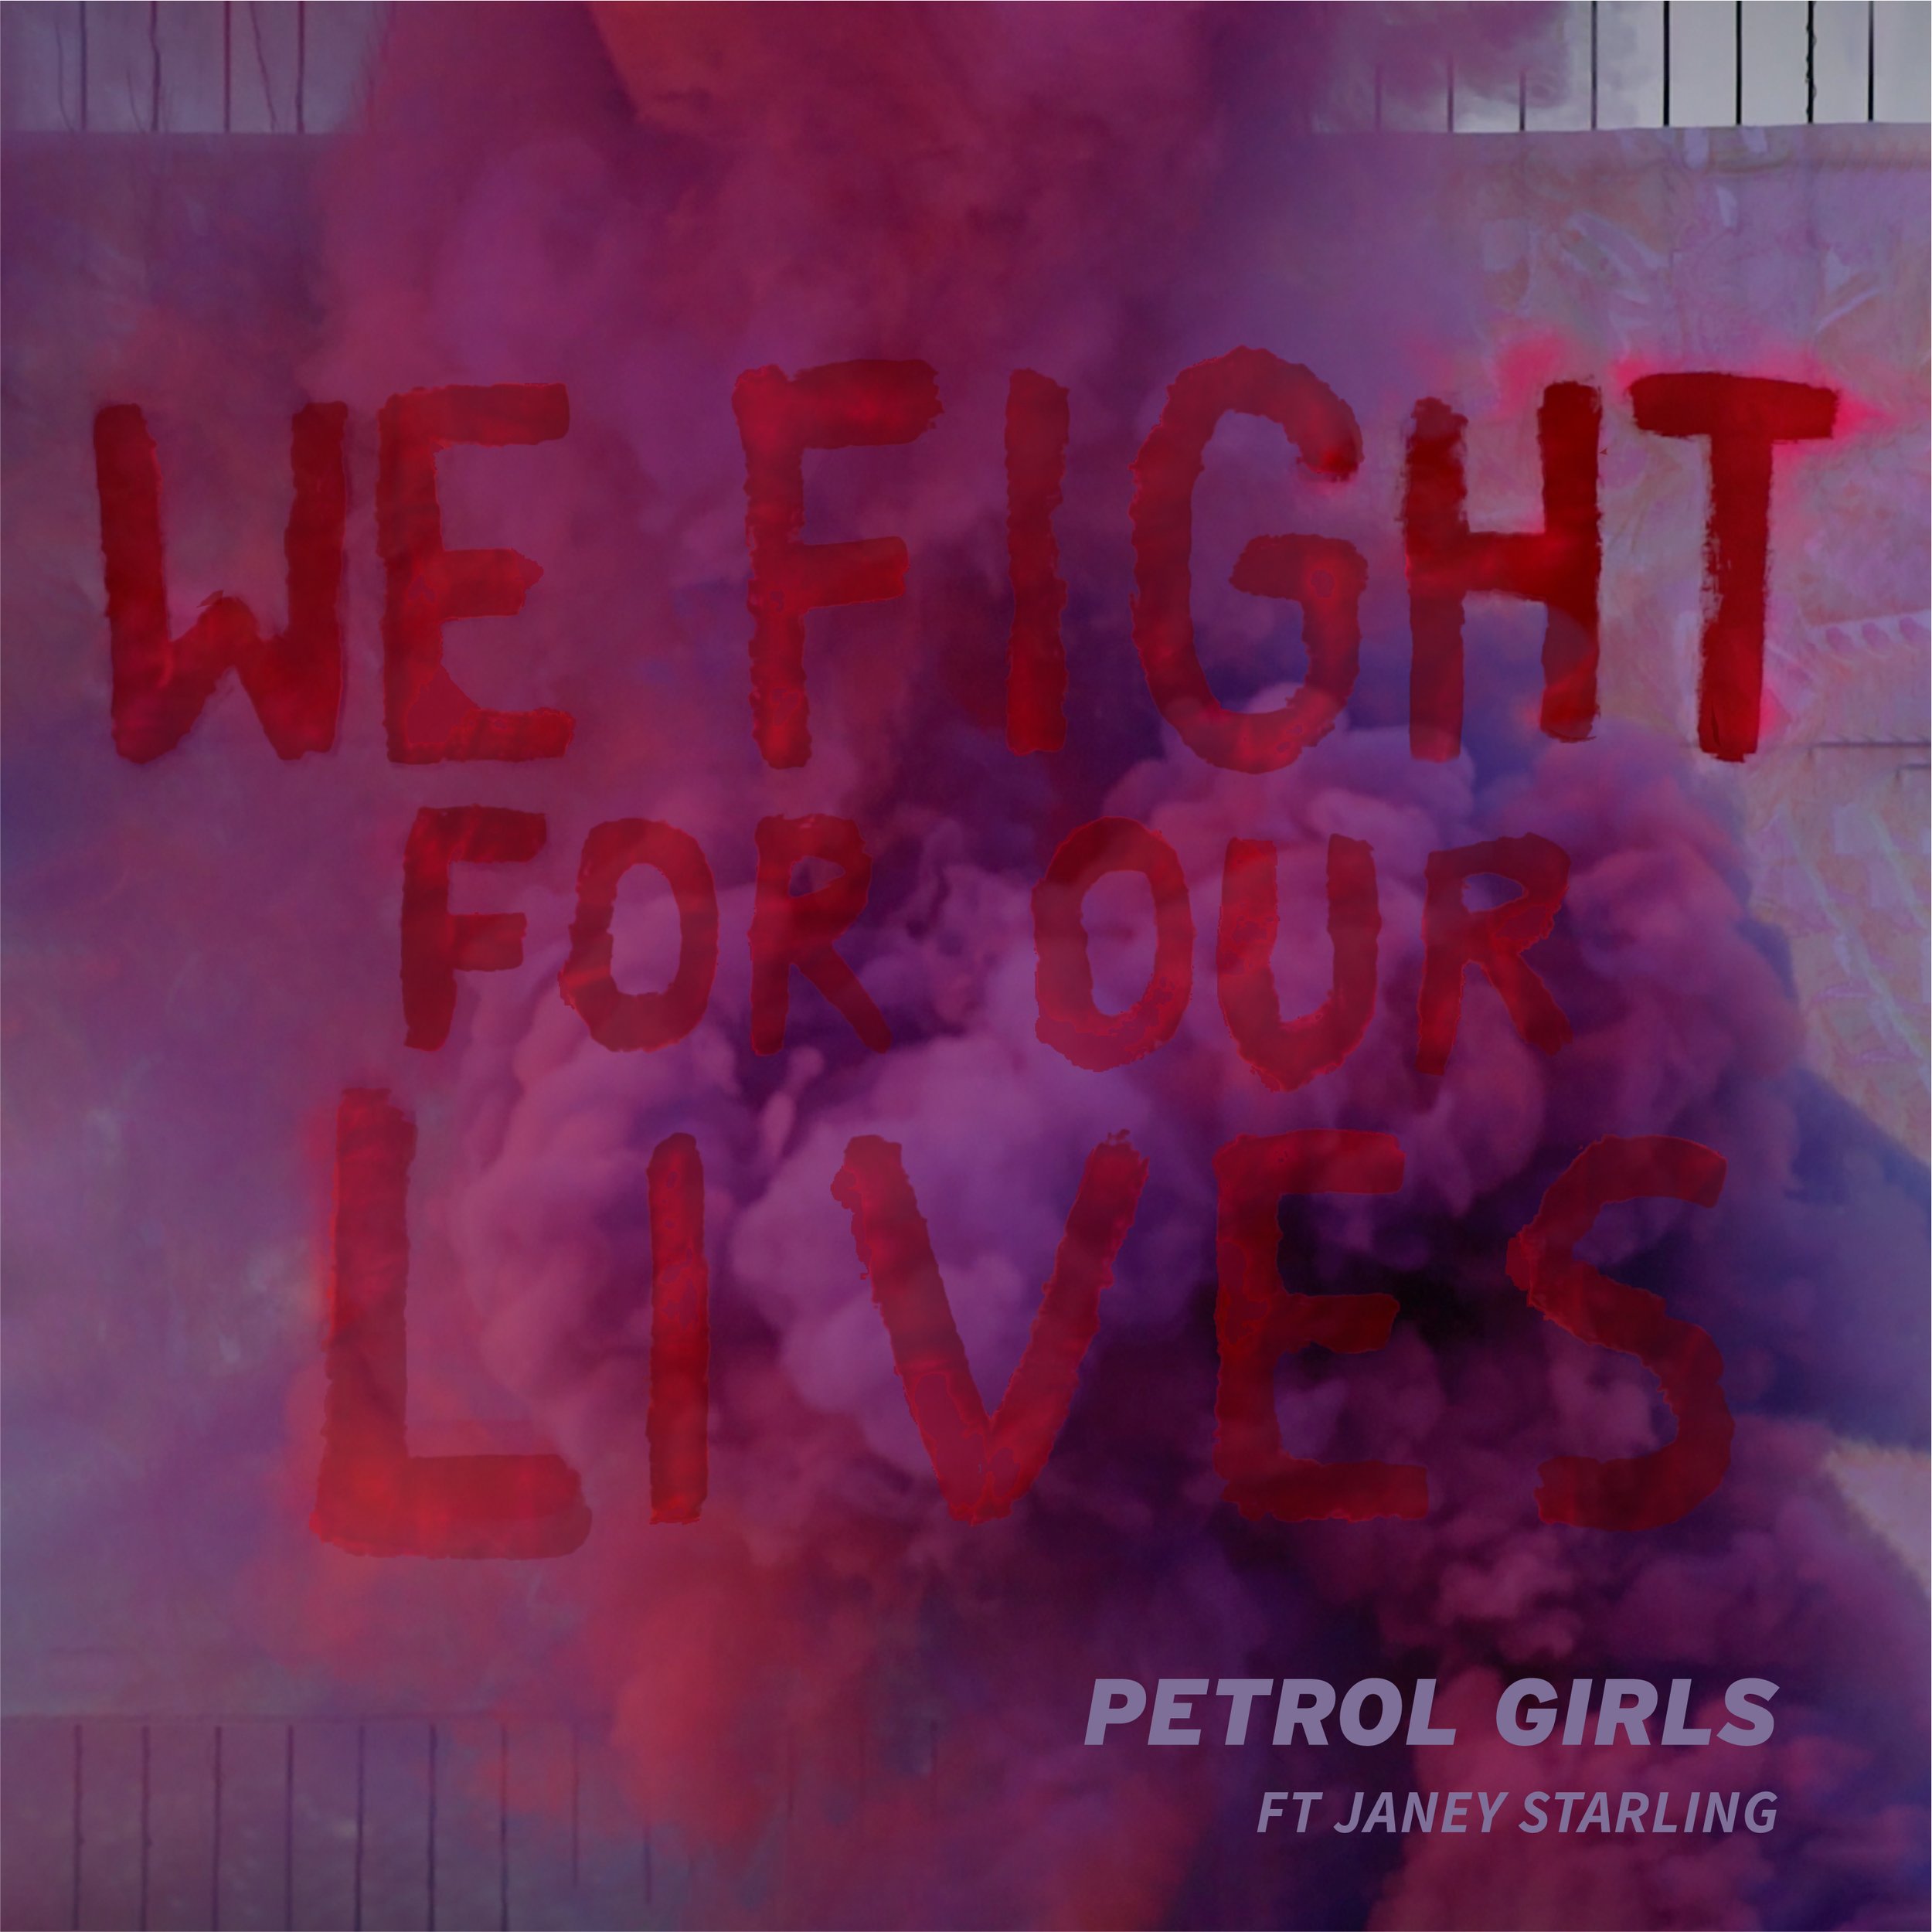 Petrol Girls - " Fight For Our Lives (ft. Janey Starling)" - Single